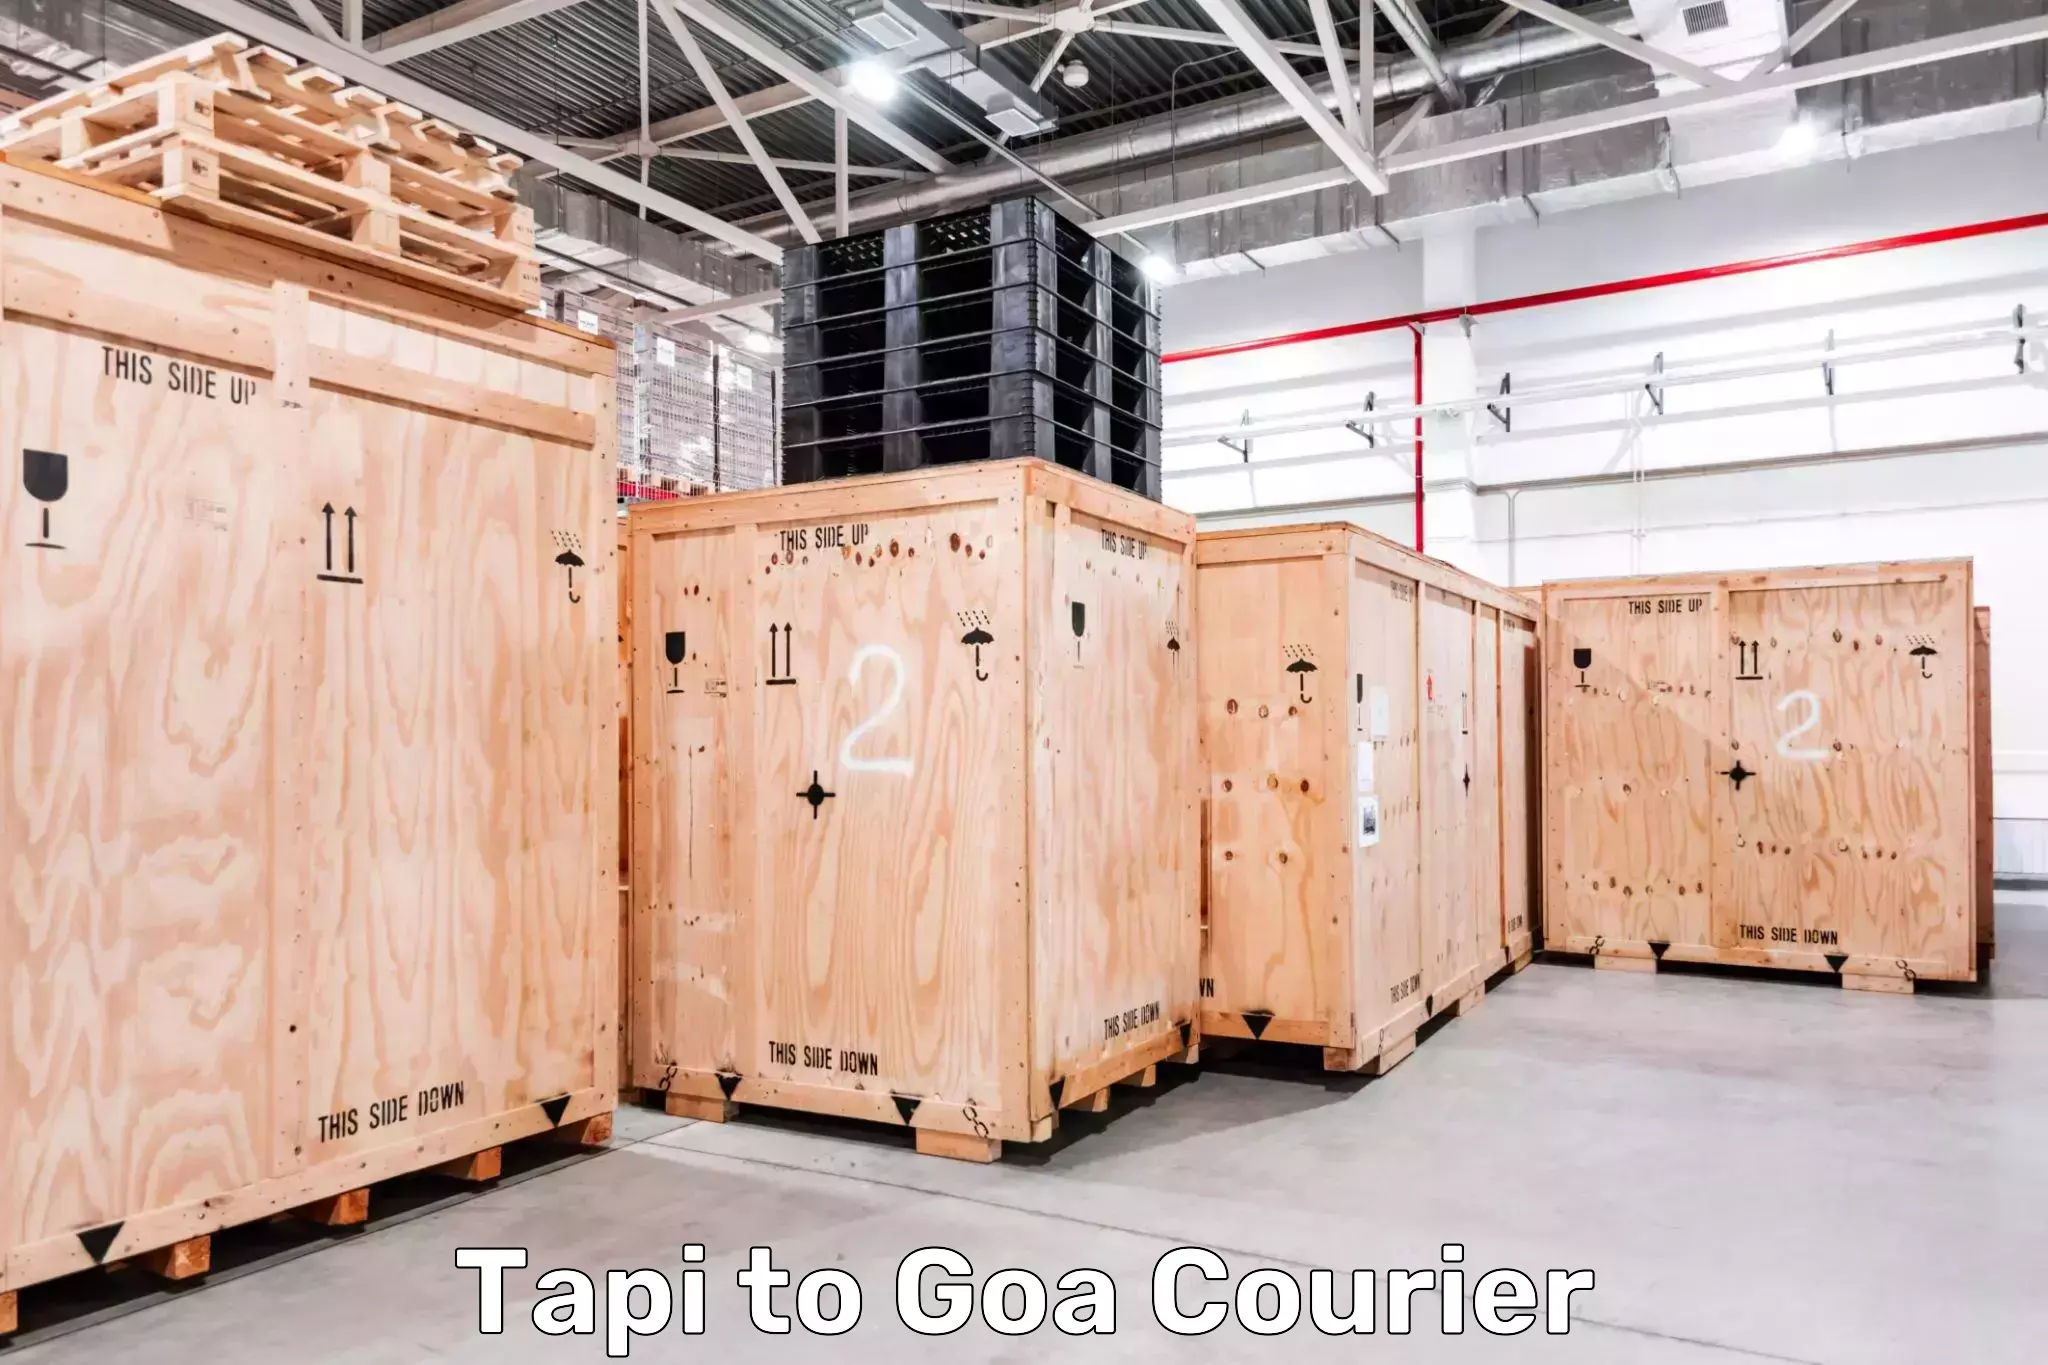 User-friendly delivery service Tapi to Goa